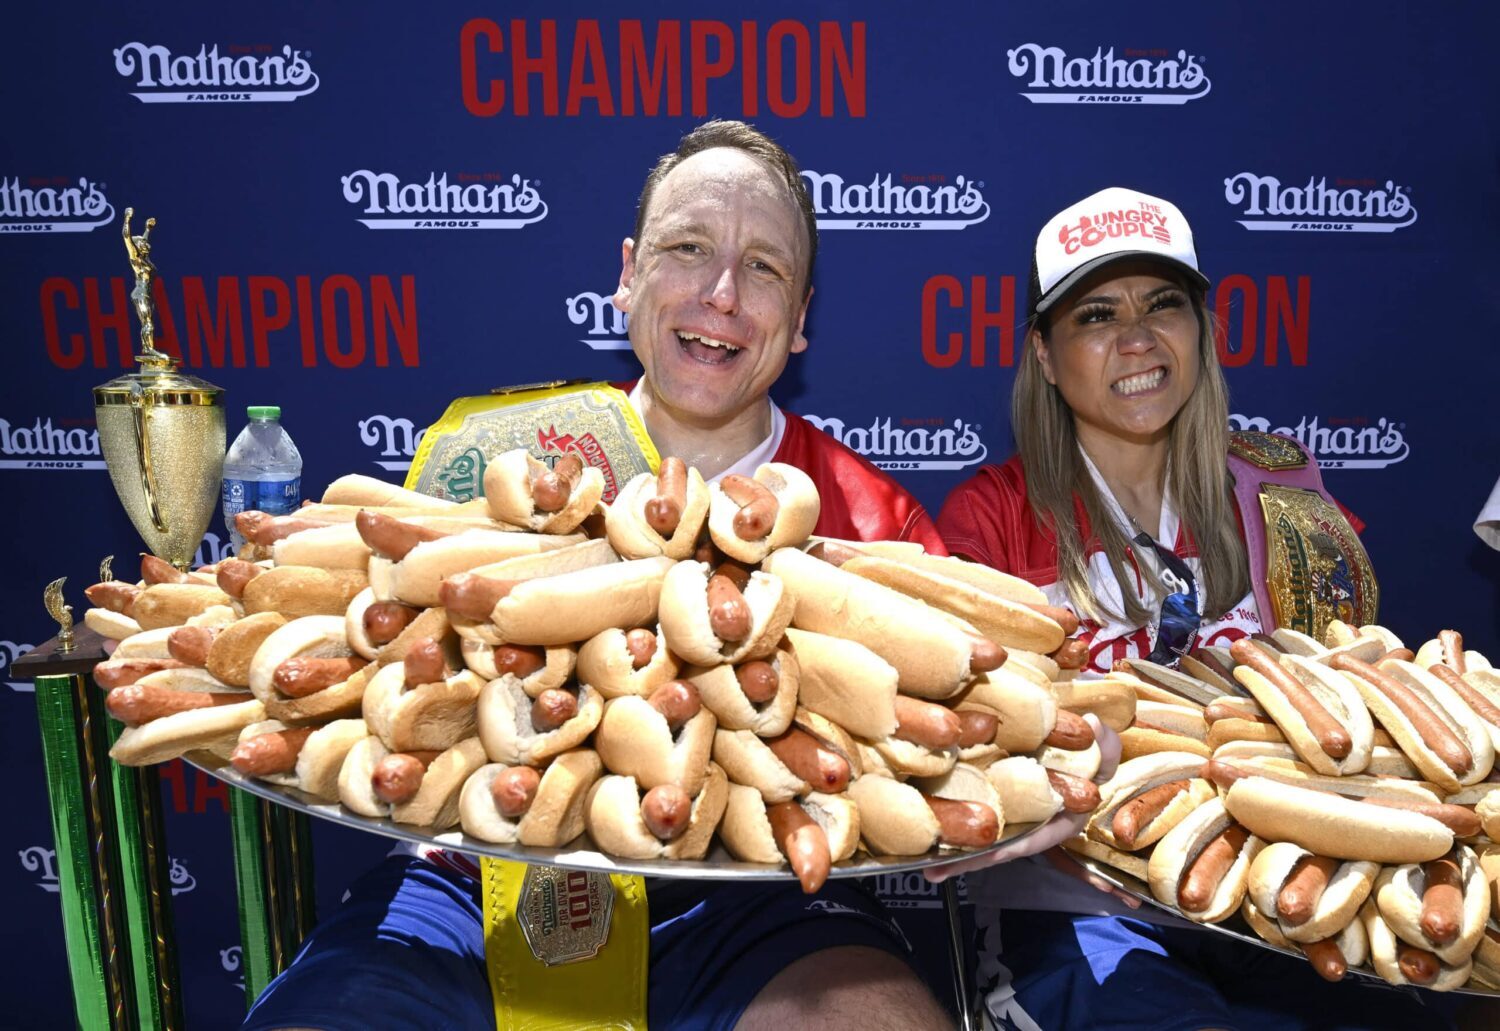 Boardwalk Empire The Nathan’s Hot Dog Contest and July 4